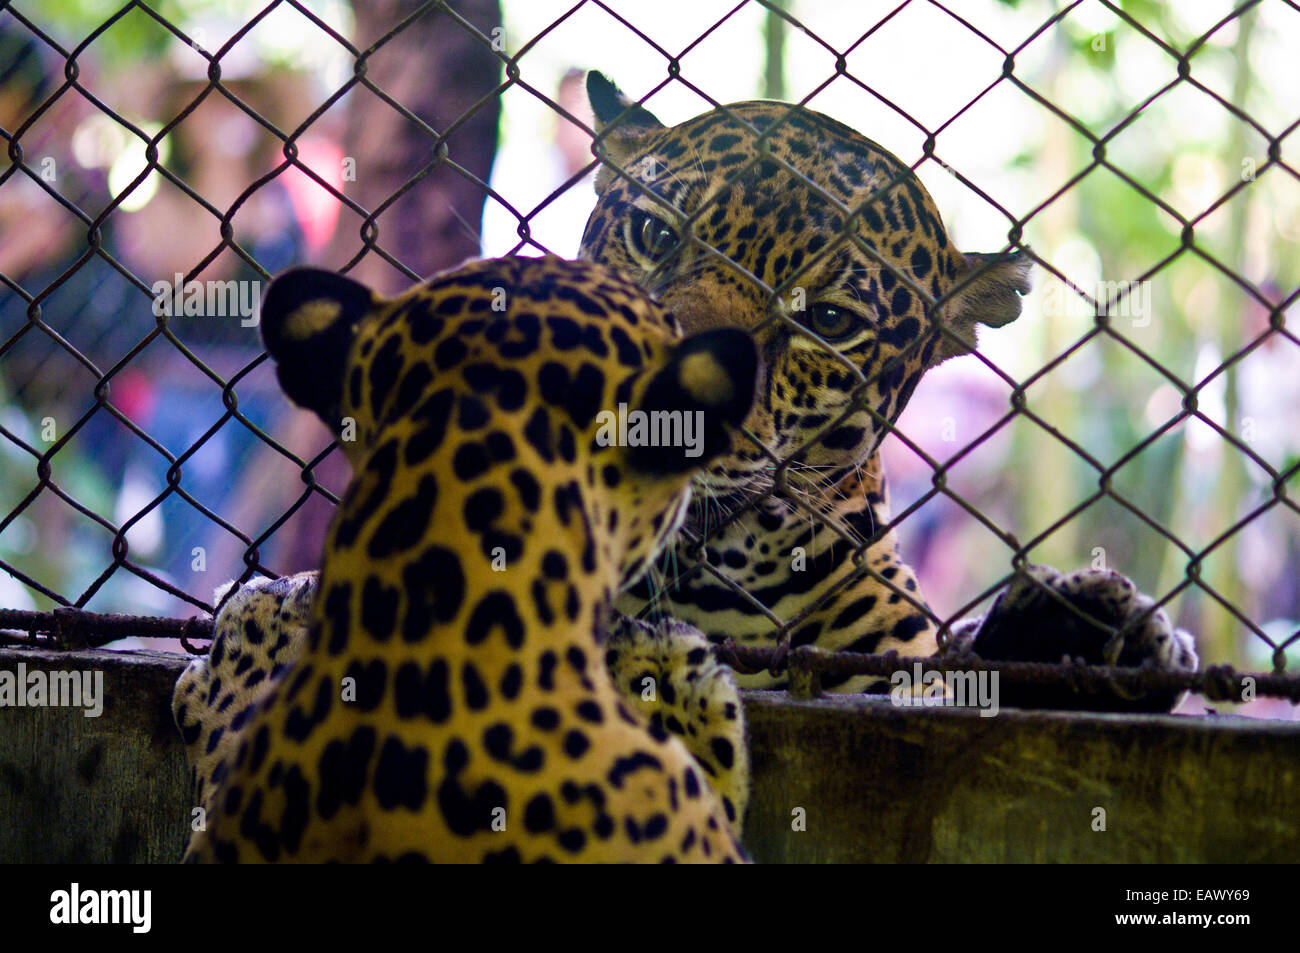 A confiscated Jaguar meets another for the first time after living in an urban environment. Stock Photo